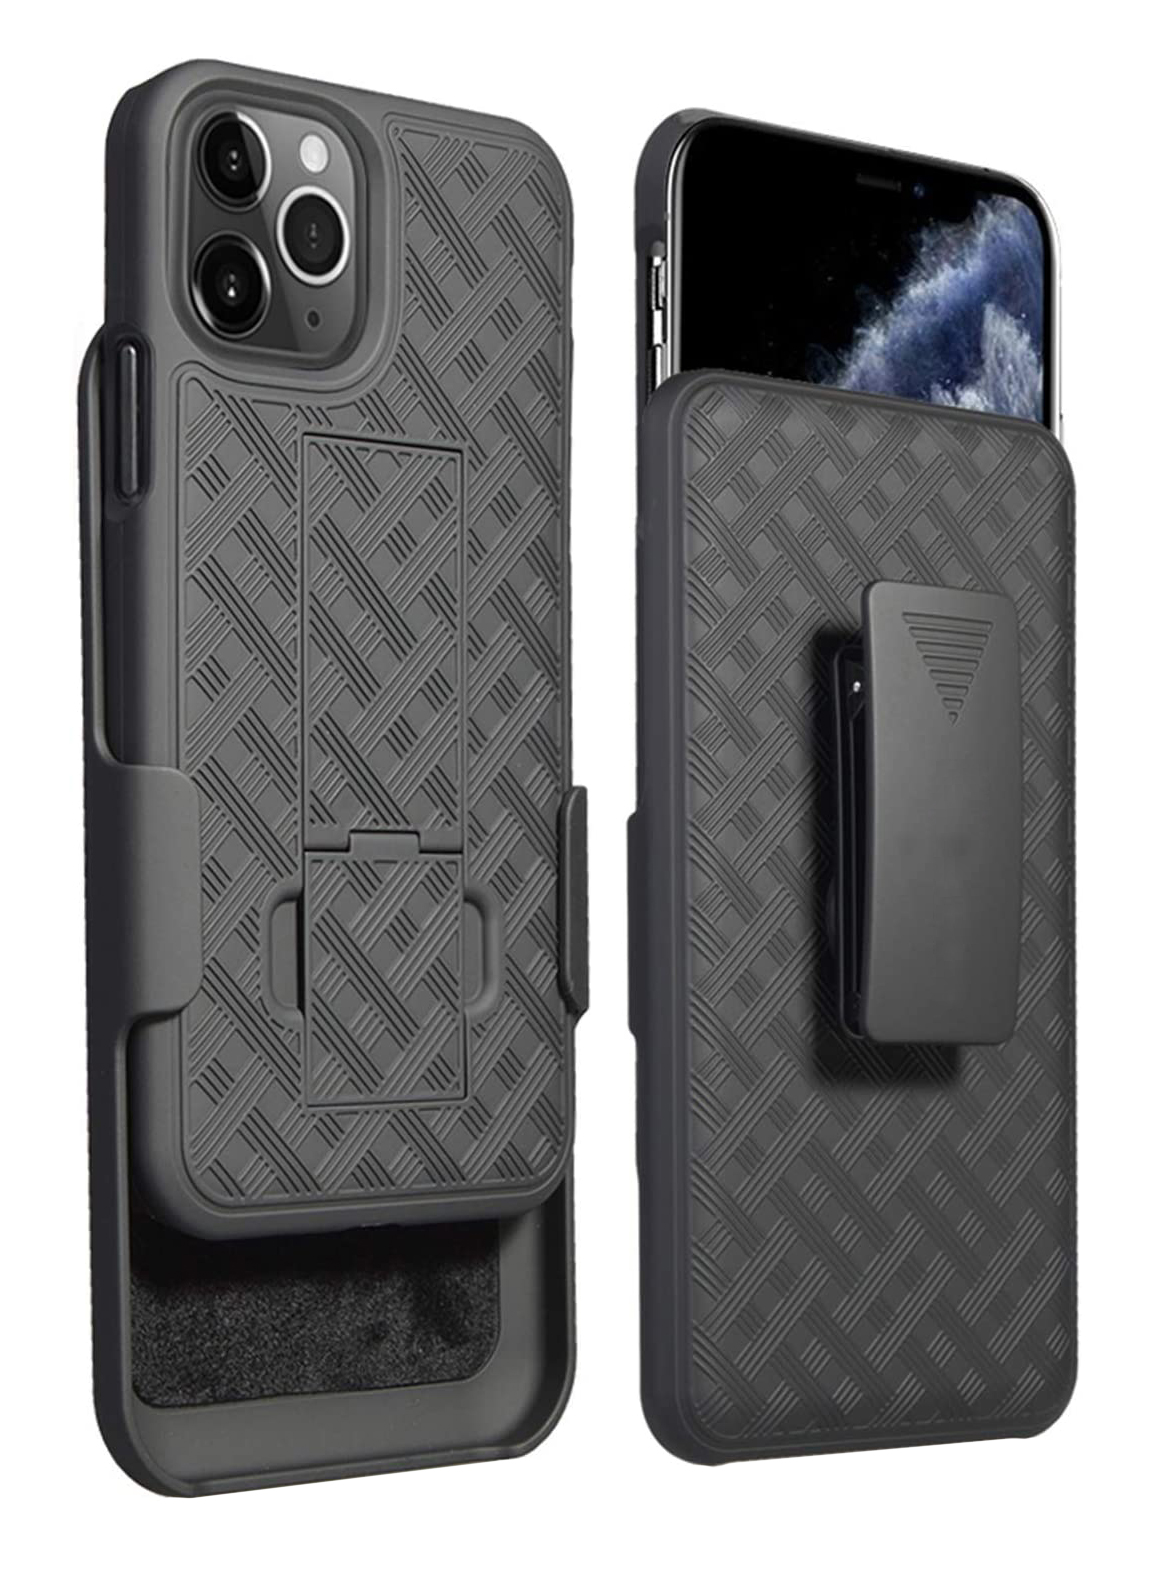 BlackBlack two-piece slim profile rubberized protective case with kickstand and strap holder for iPhone 12 Mini cell phones